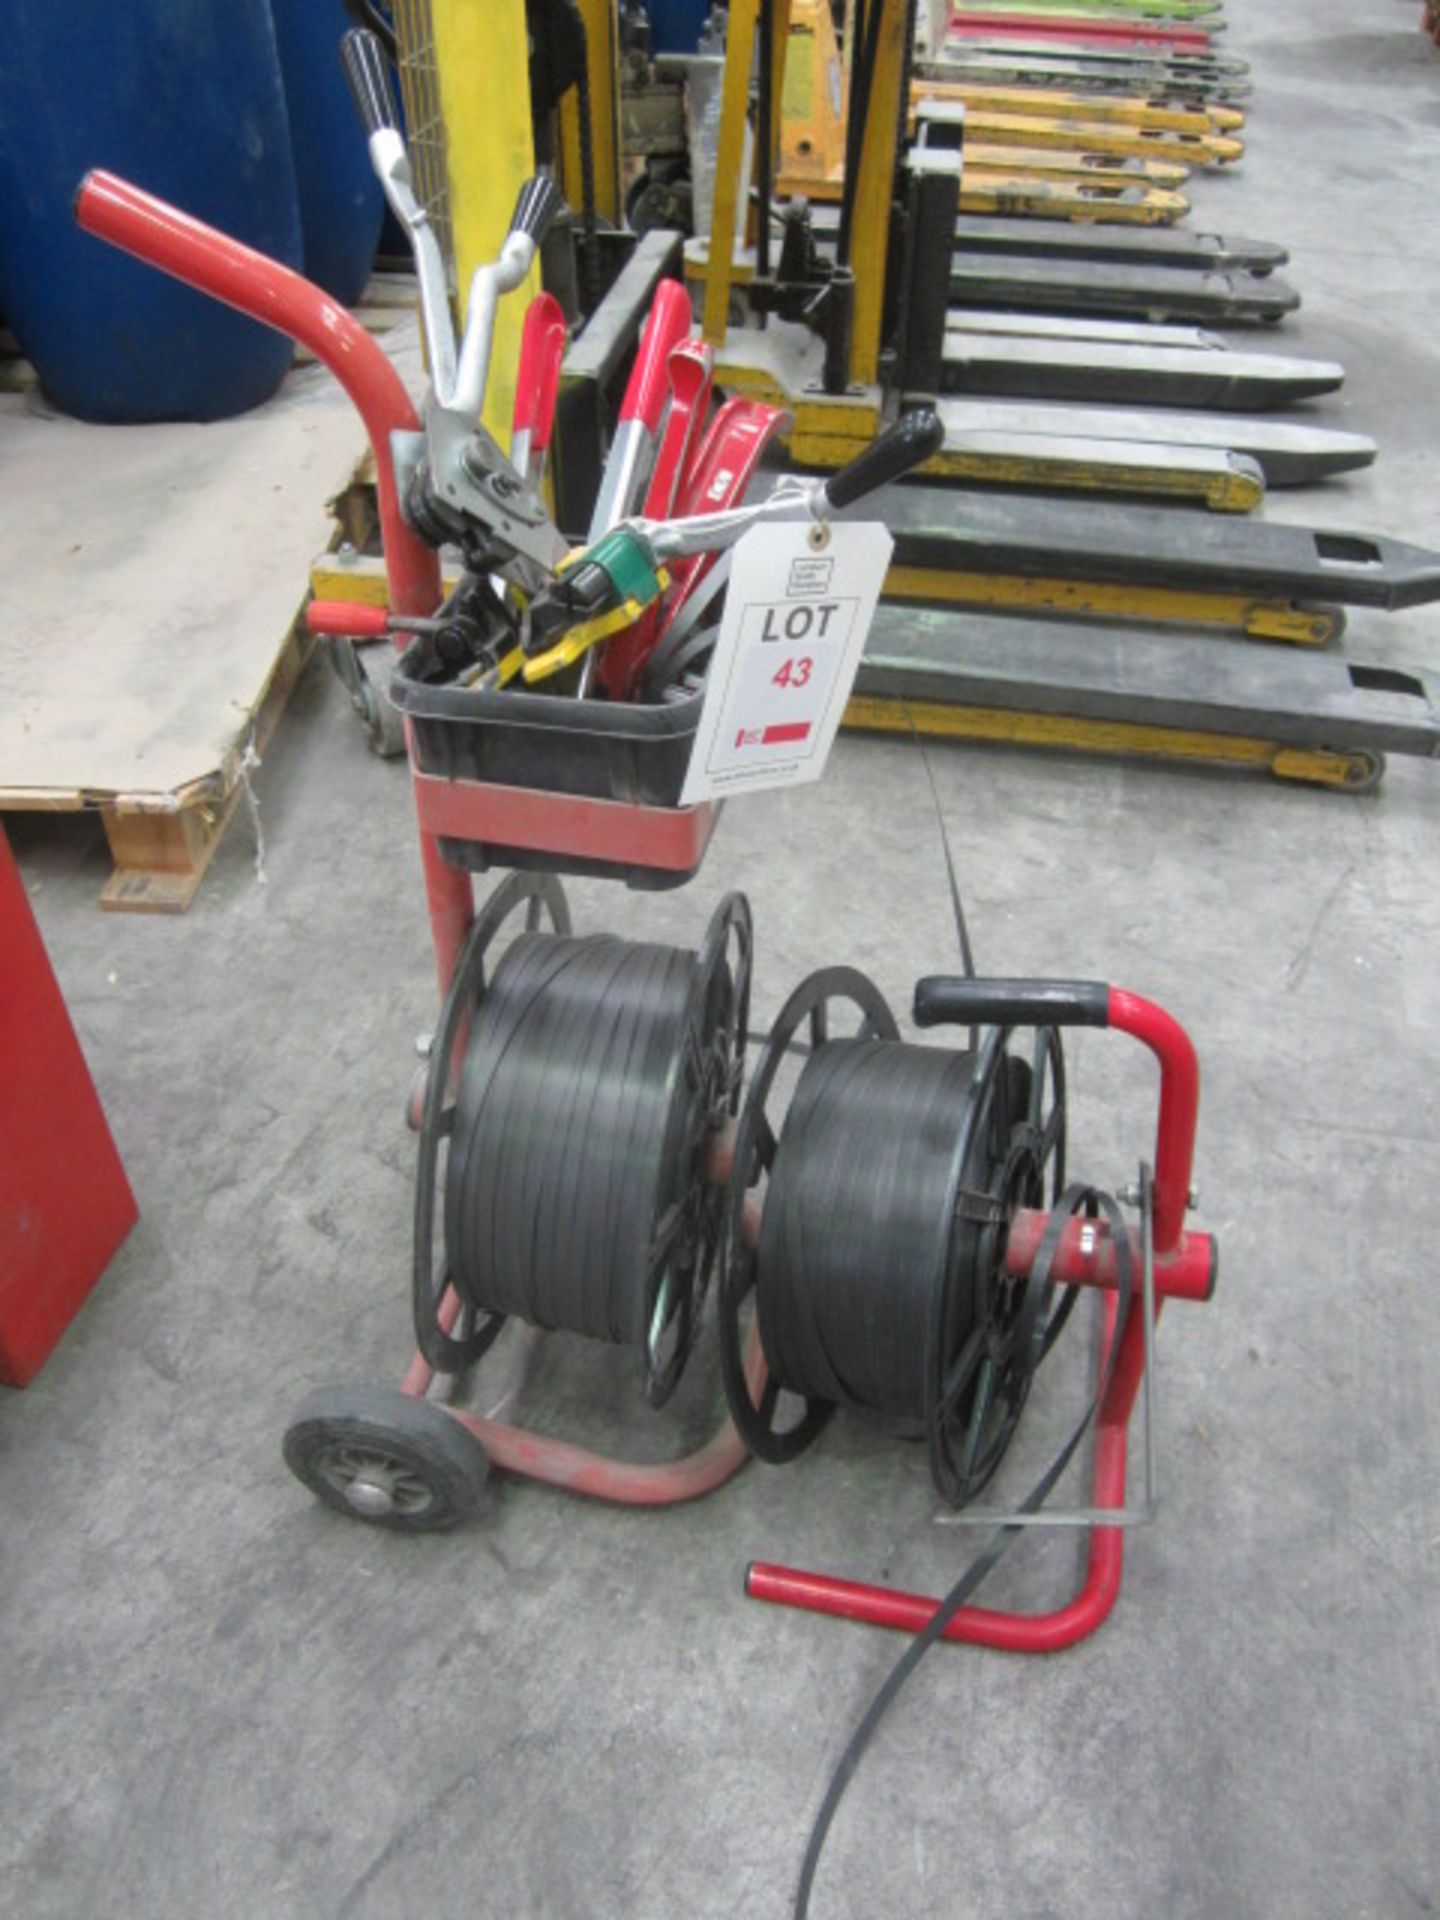 Banding trolley, banding wire and associated equipment